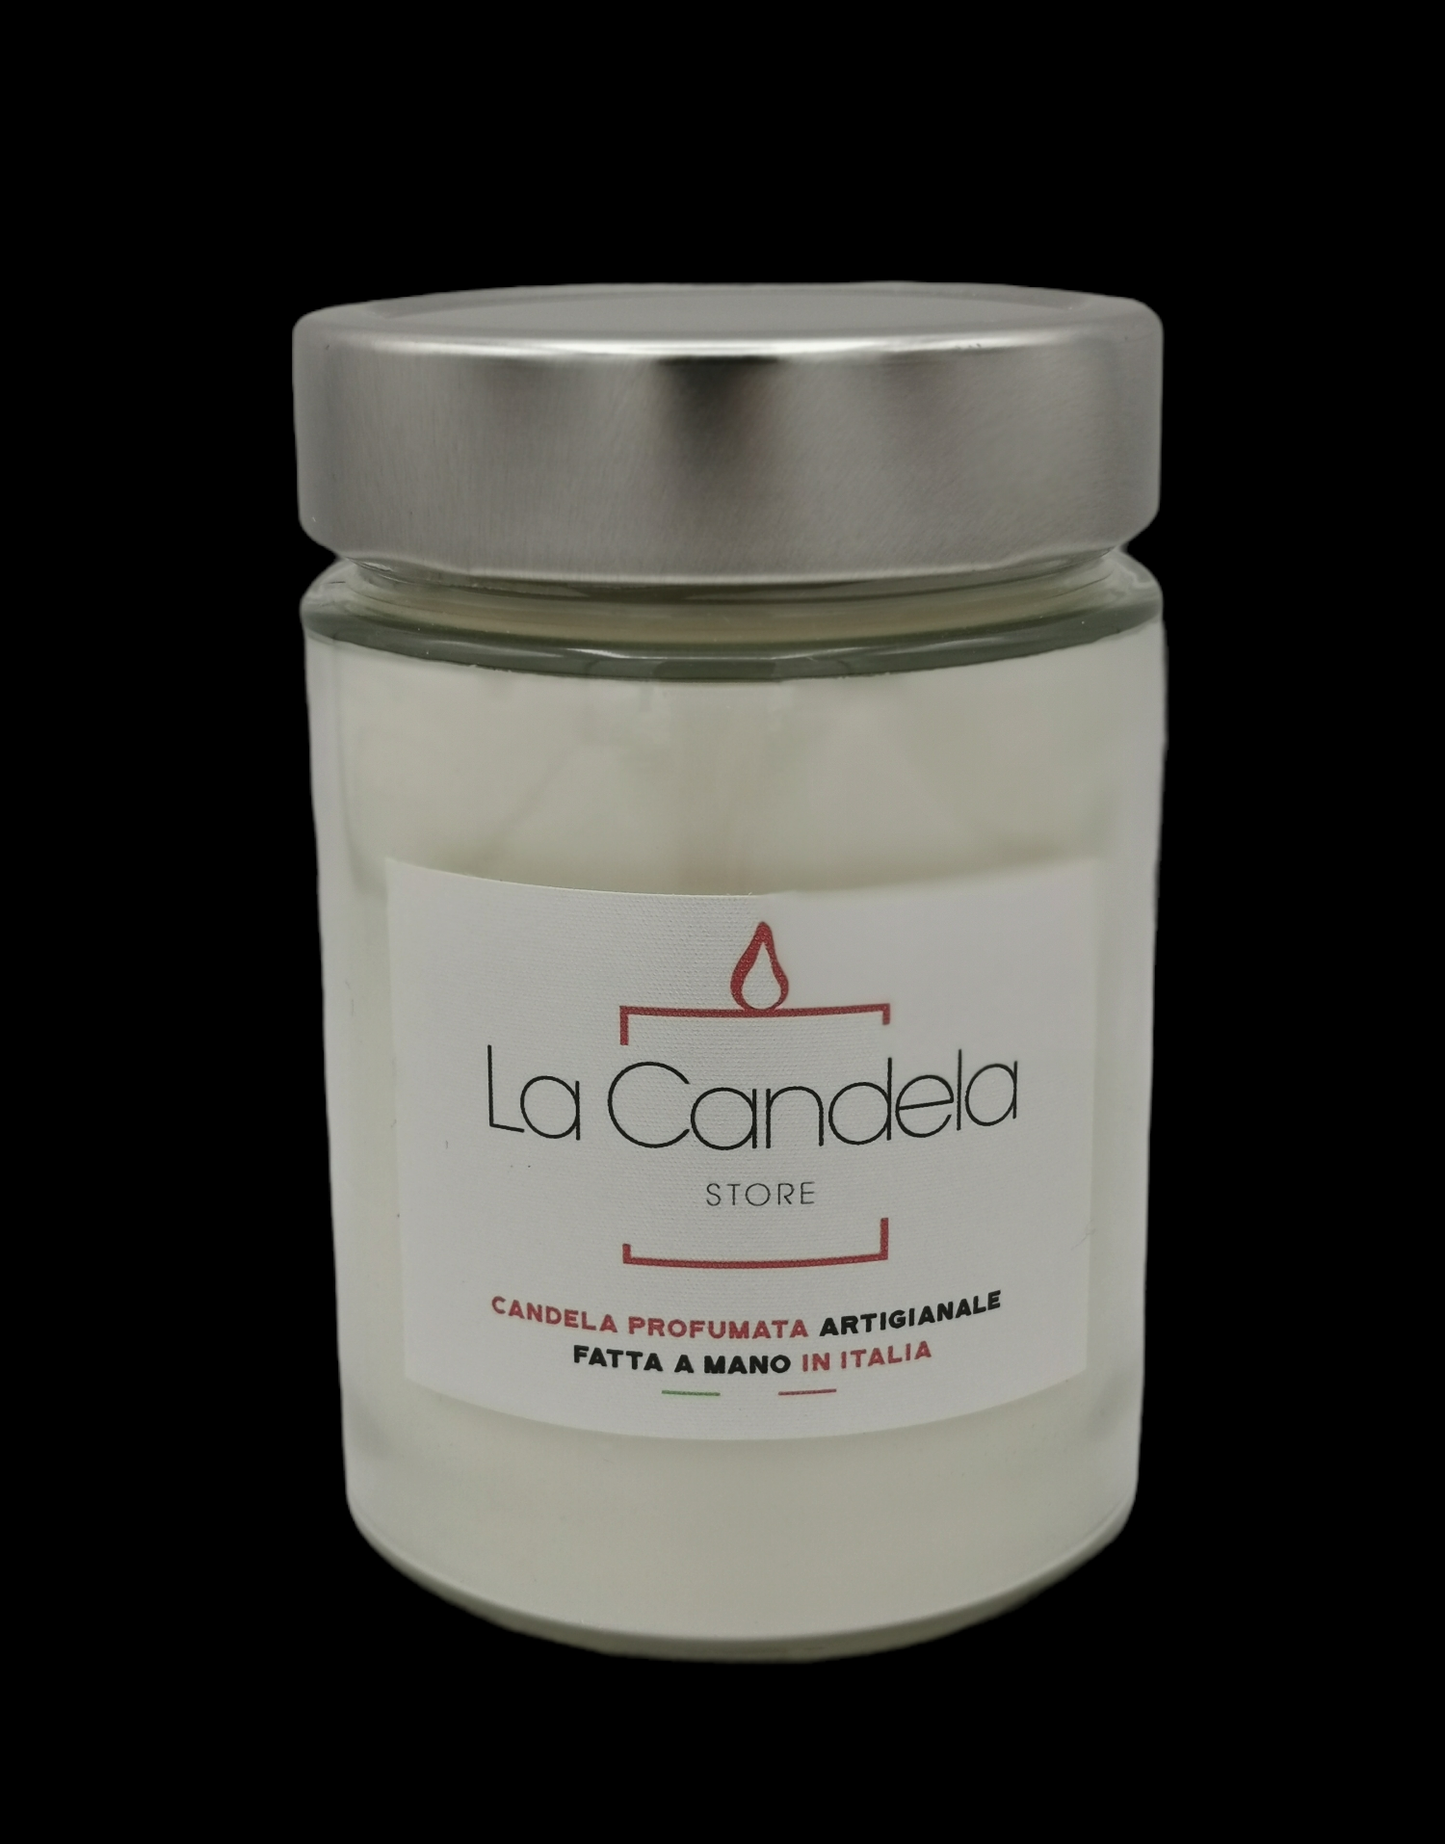 Natural coconut scented candle